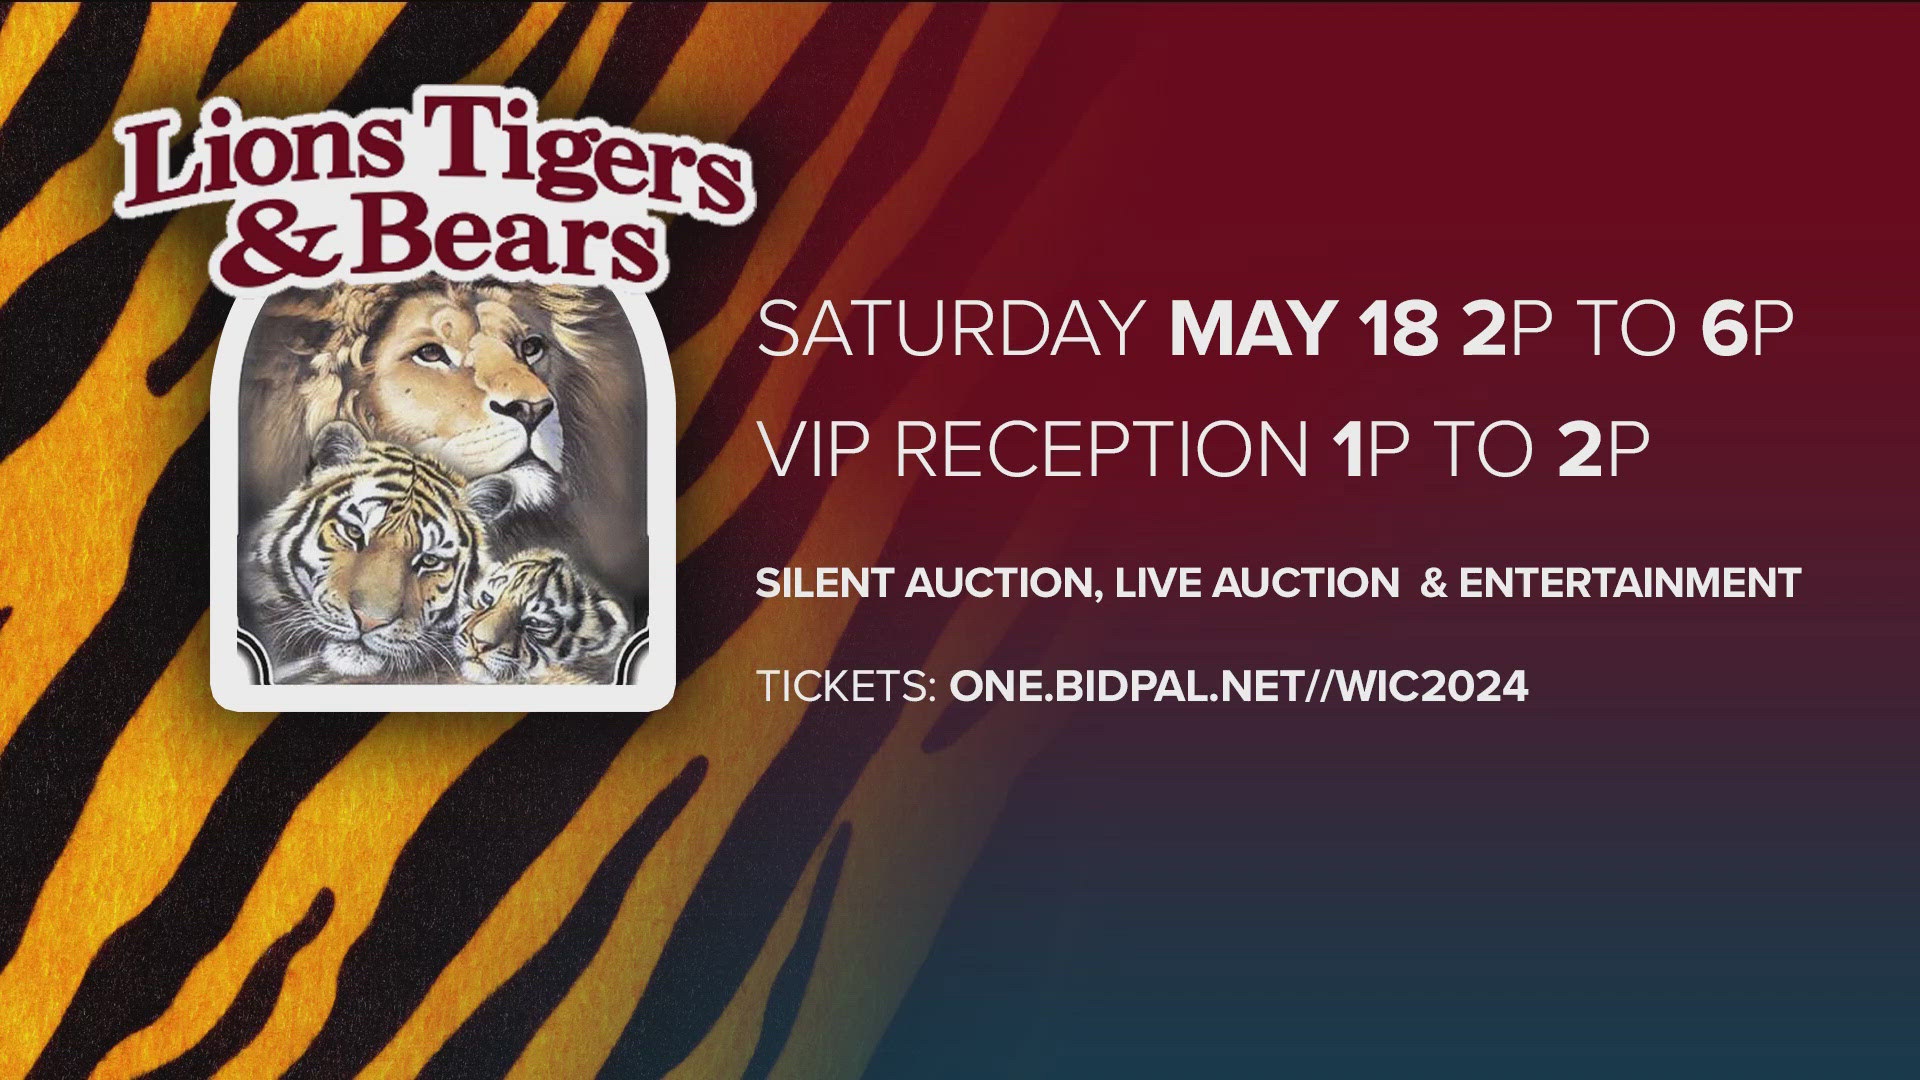 Wild in the Country is Lions Tigers & Bears' biggest and most important fundraiser of the year.